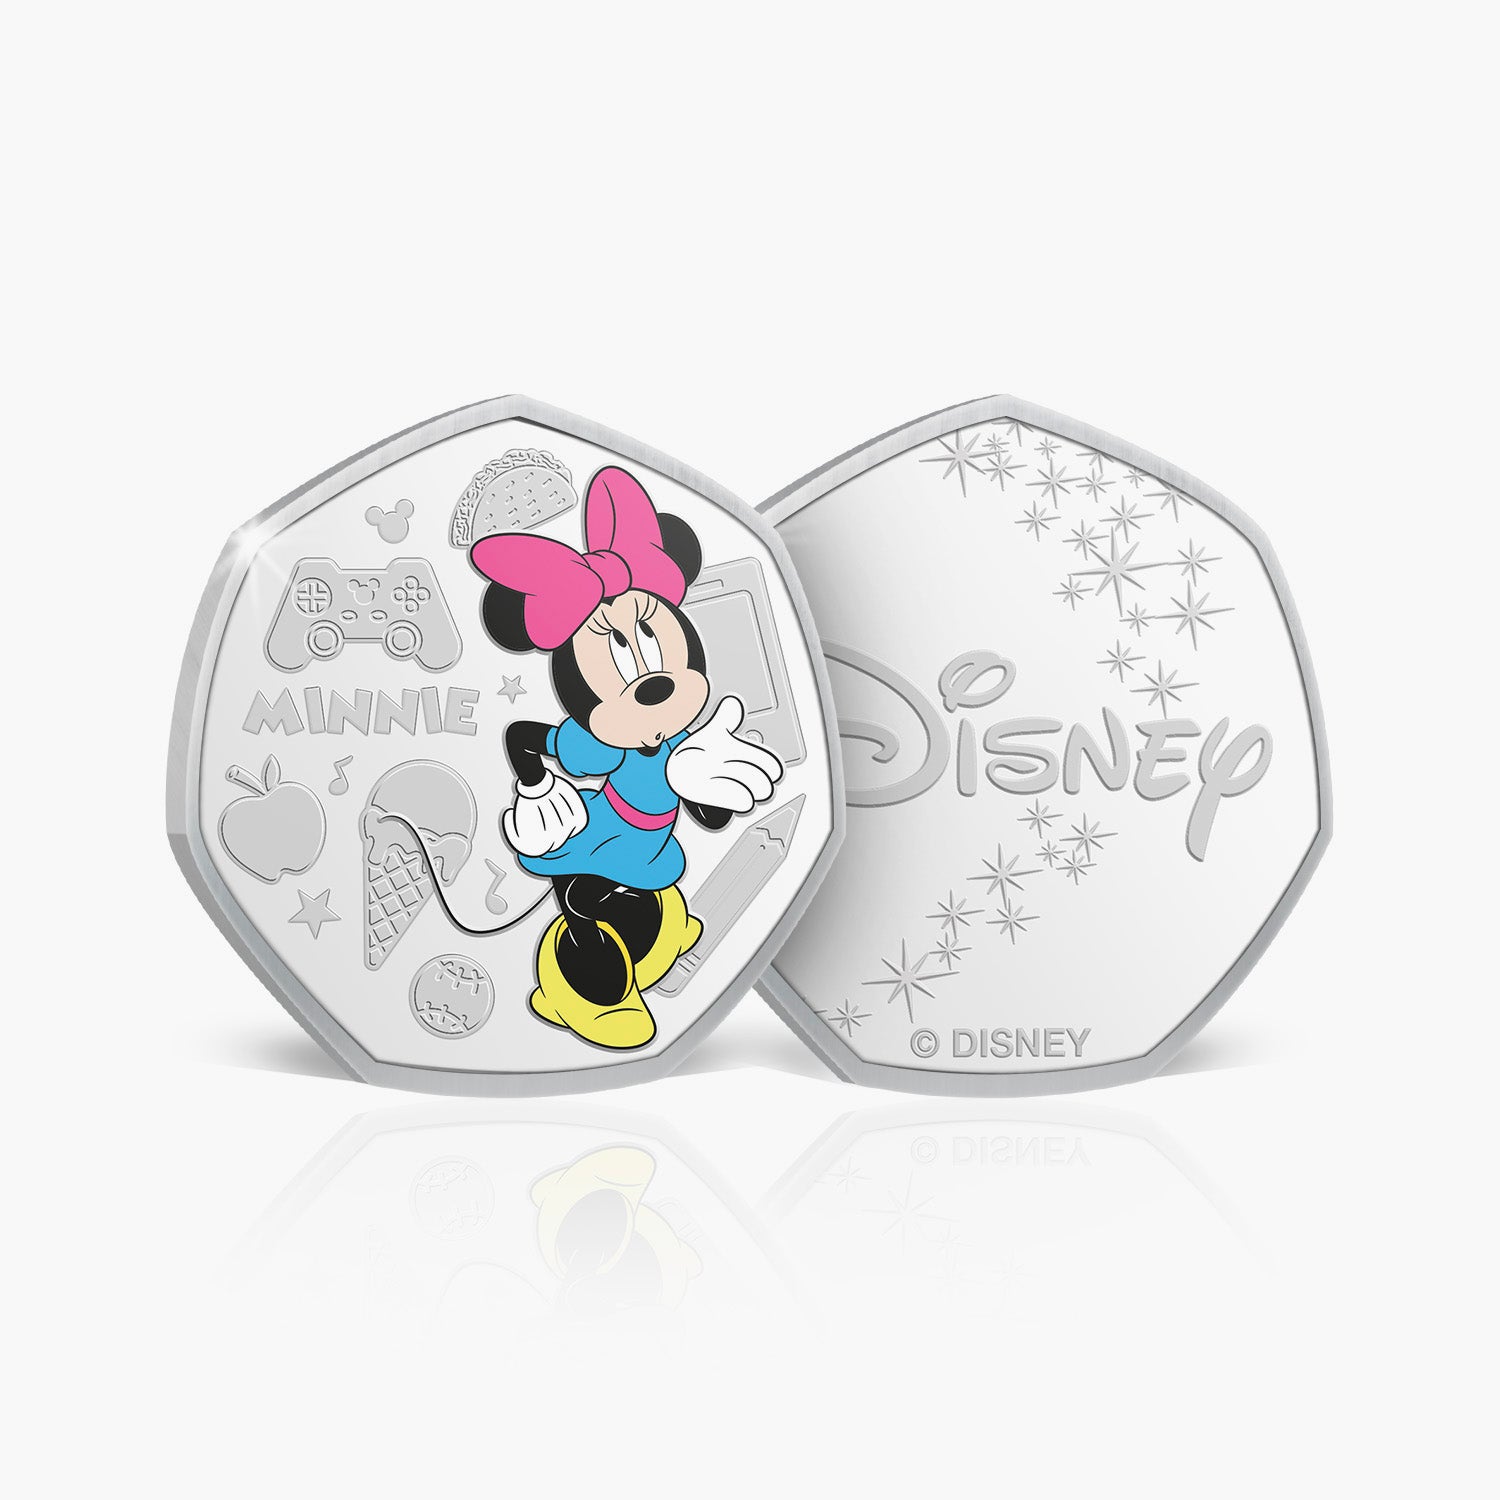 Minnie Mouse Silver-Plated commemorative